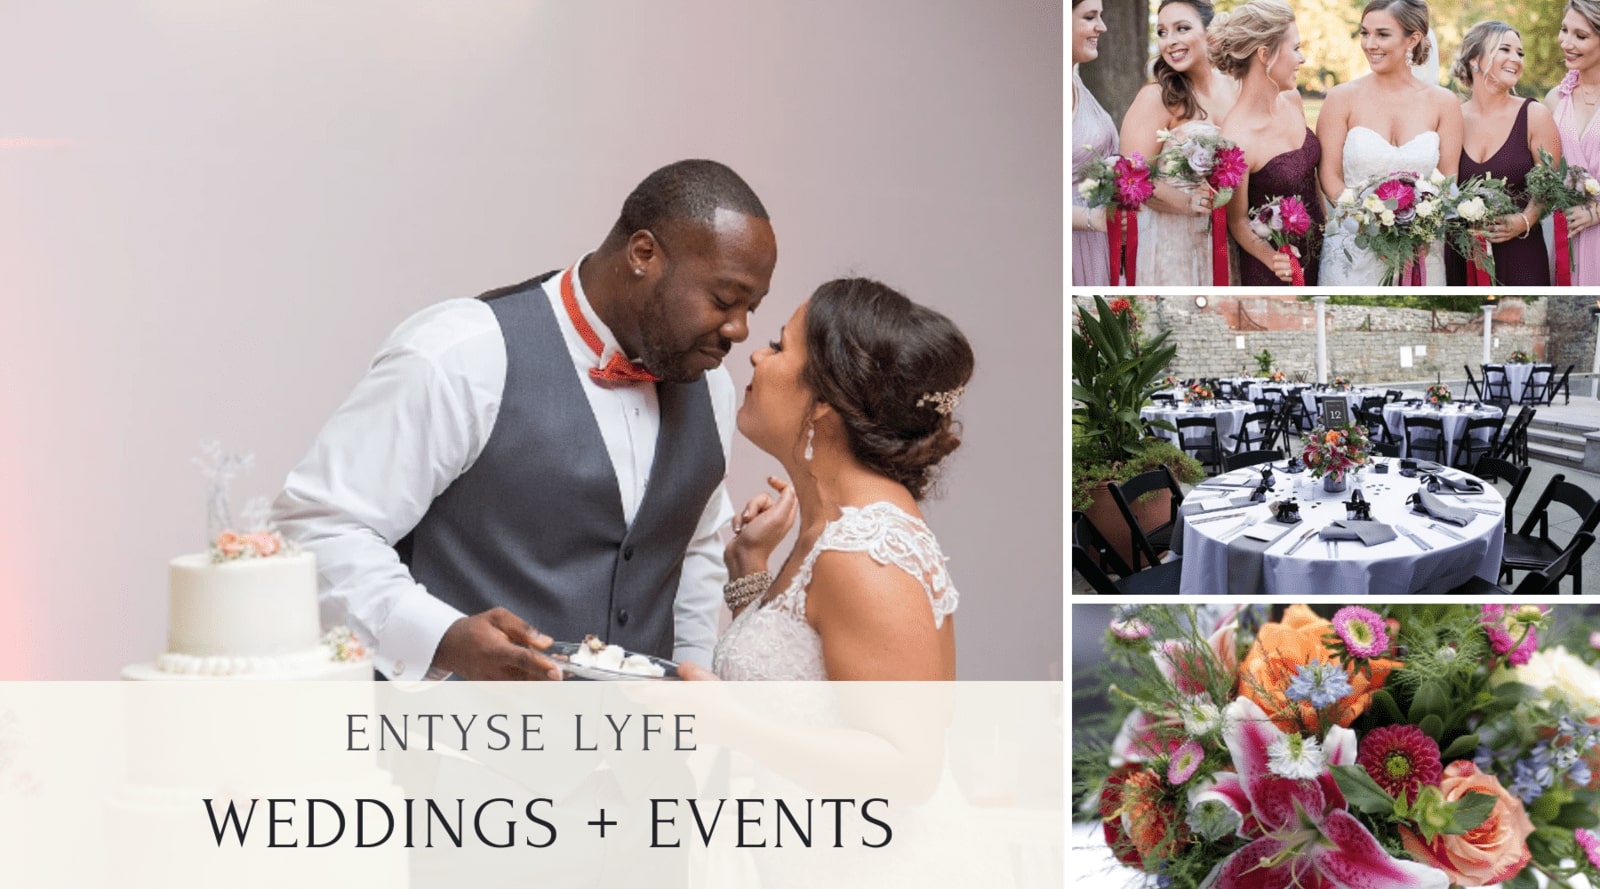 Today's Expert: Andrea Davis from Entyse Lyfe Weddings and Events